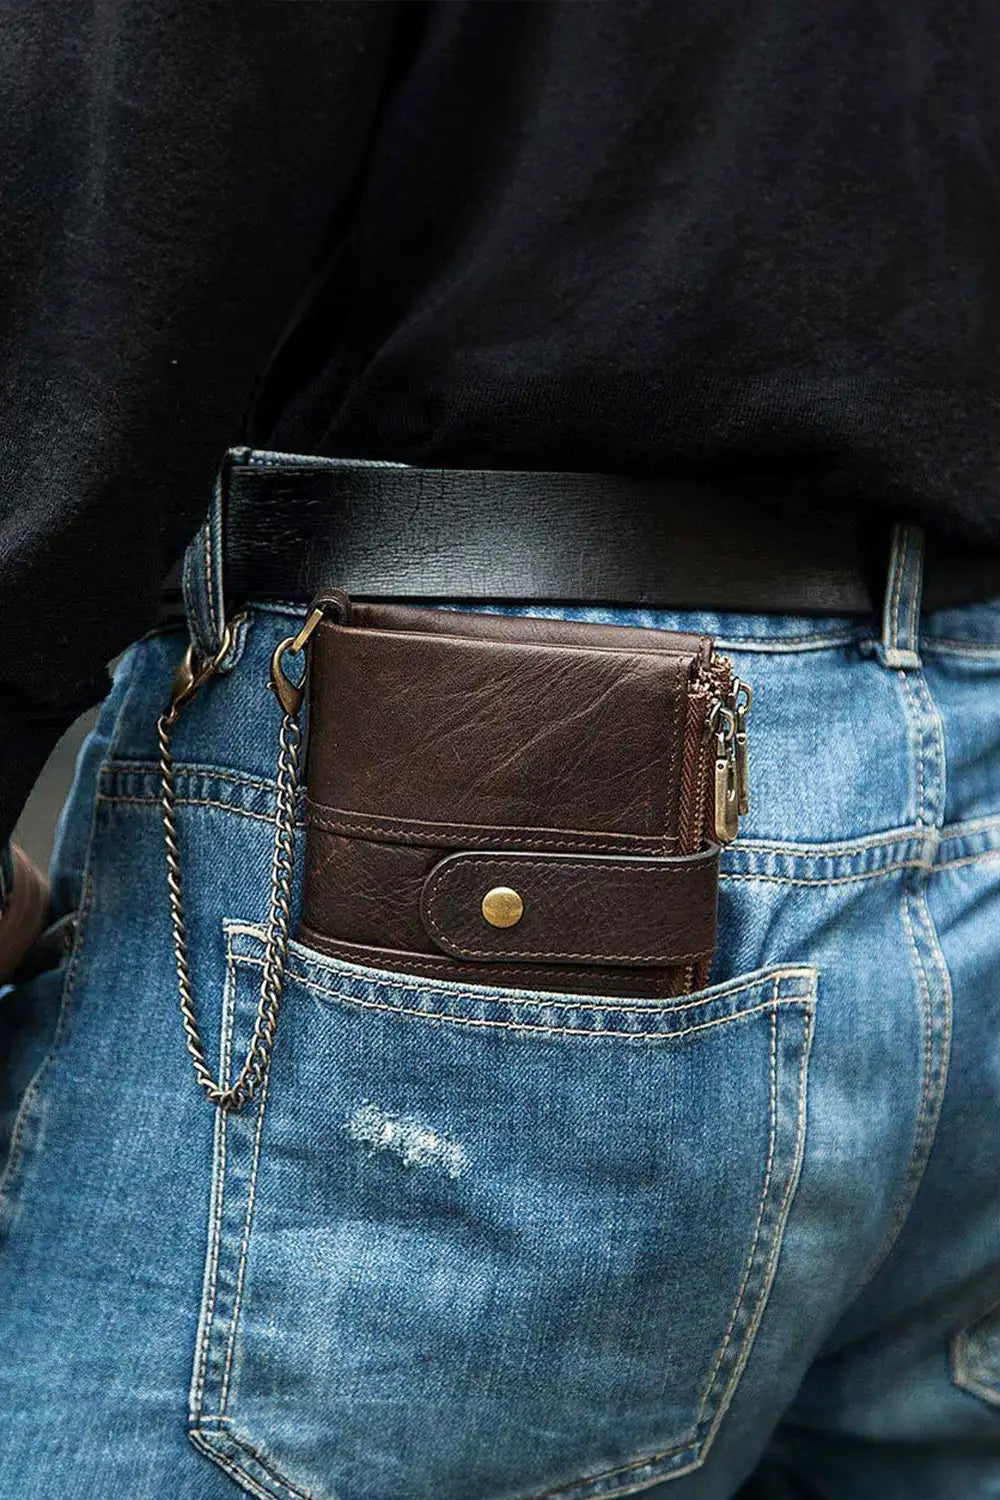 Men’s Genuine Leather Trifold Wallet with ID Window